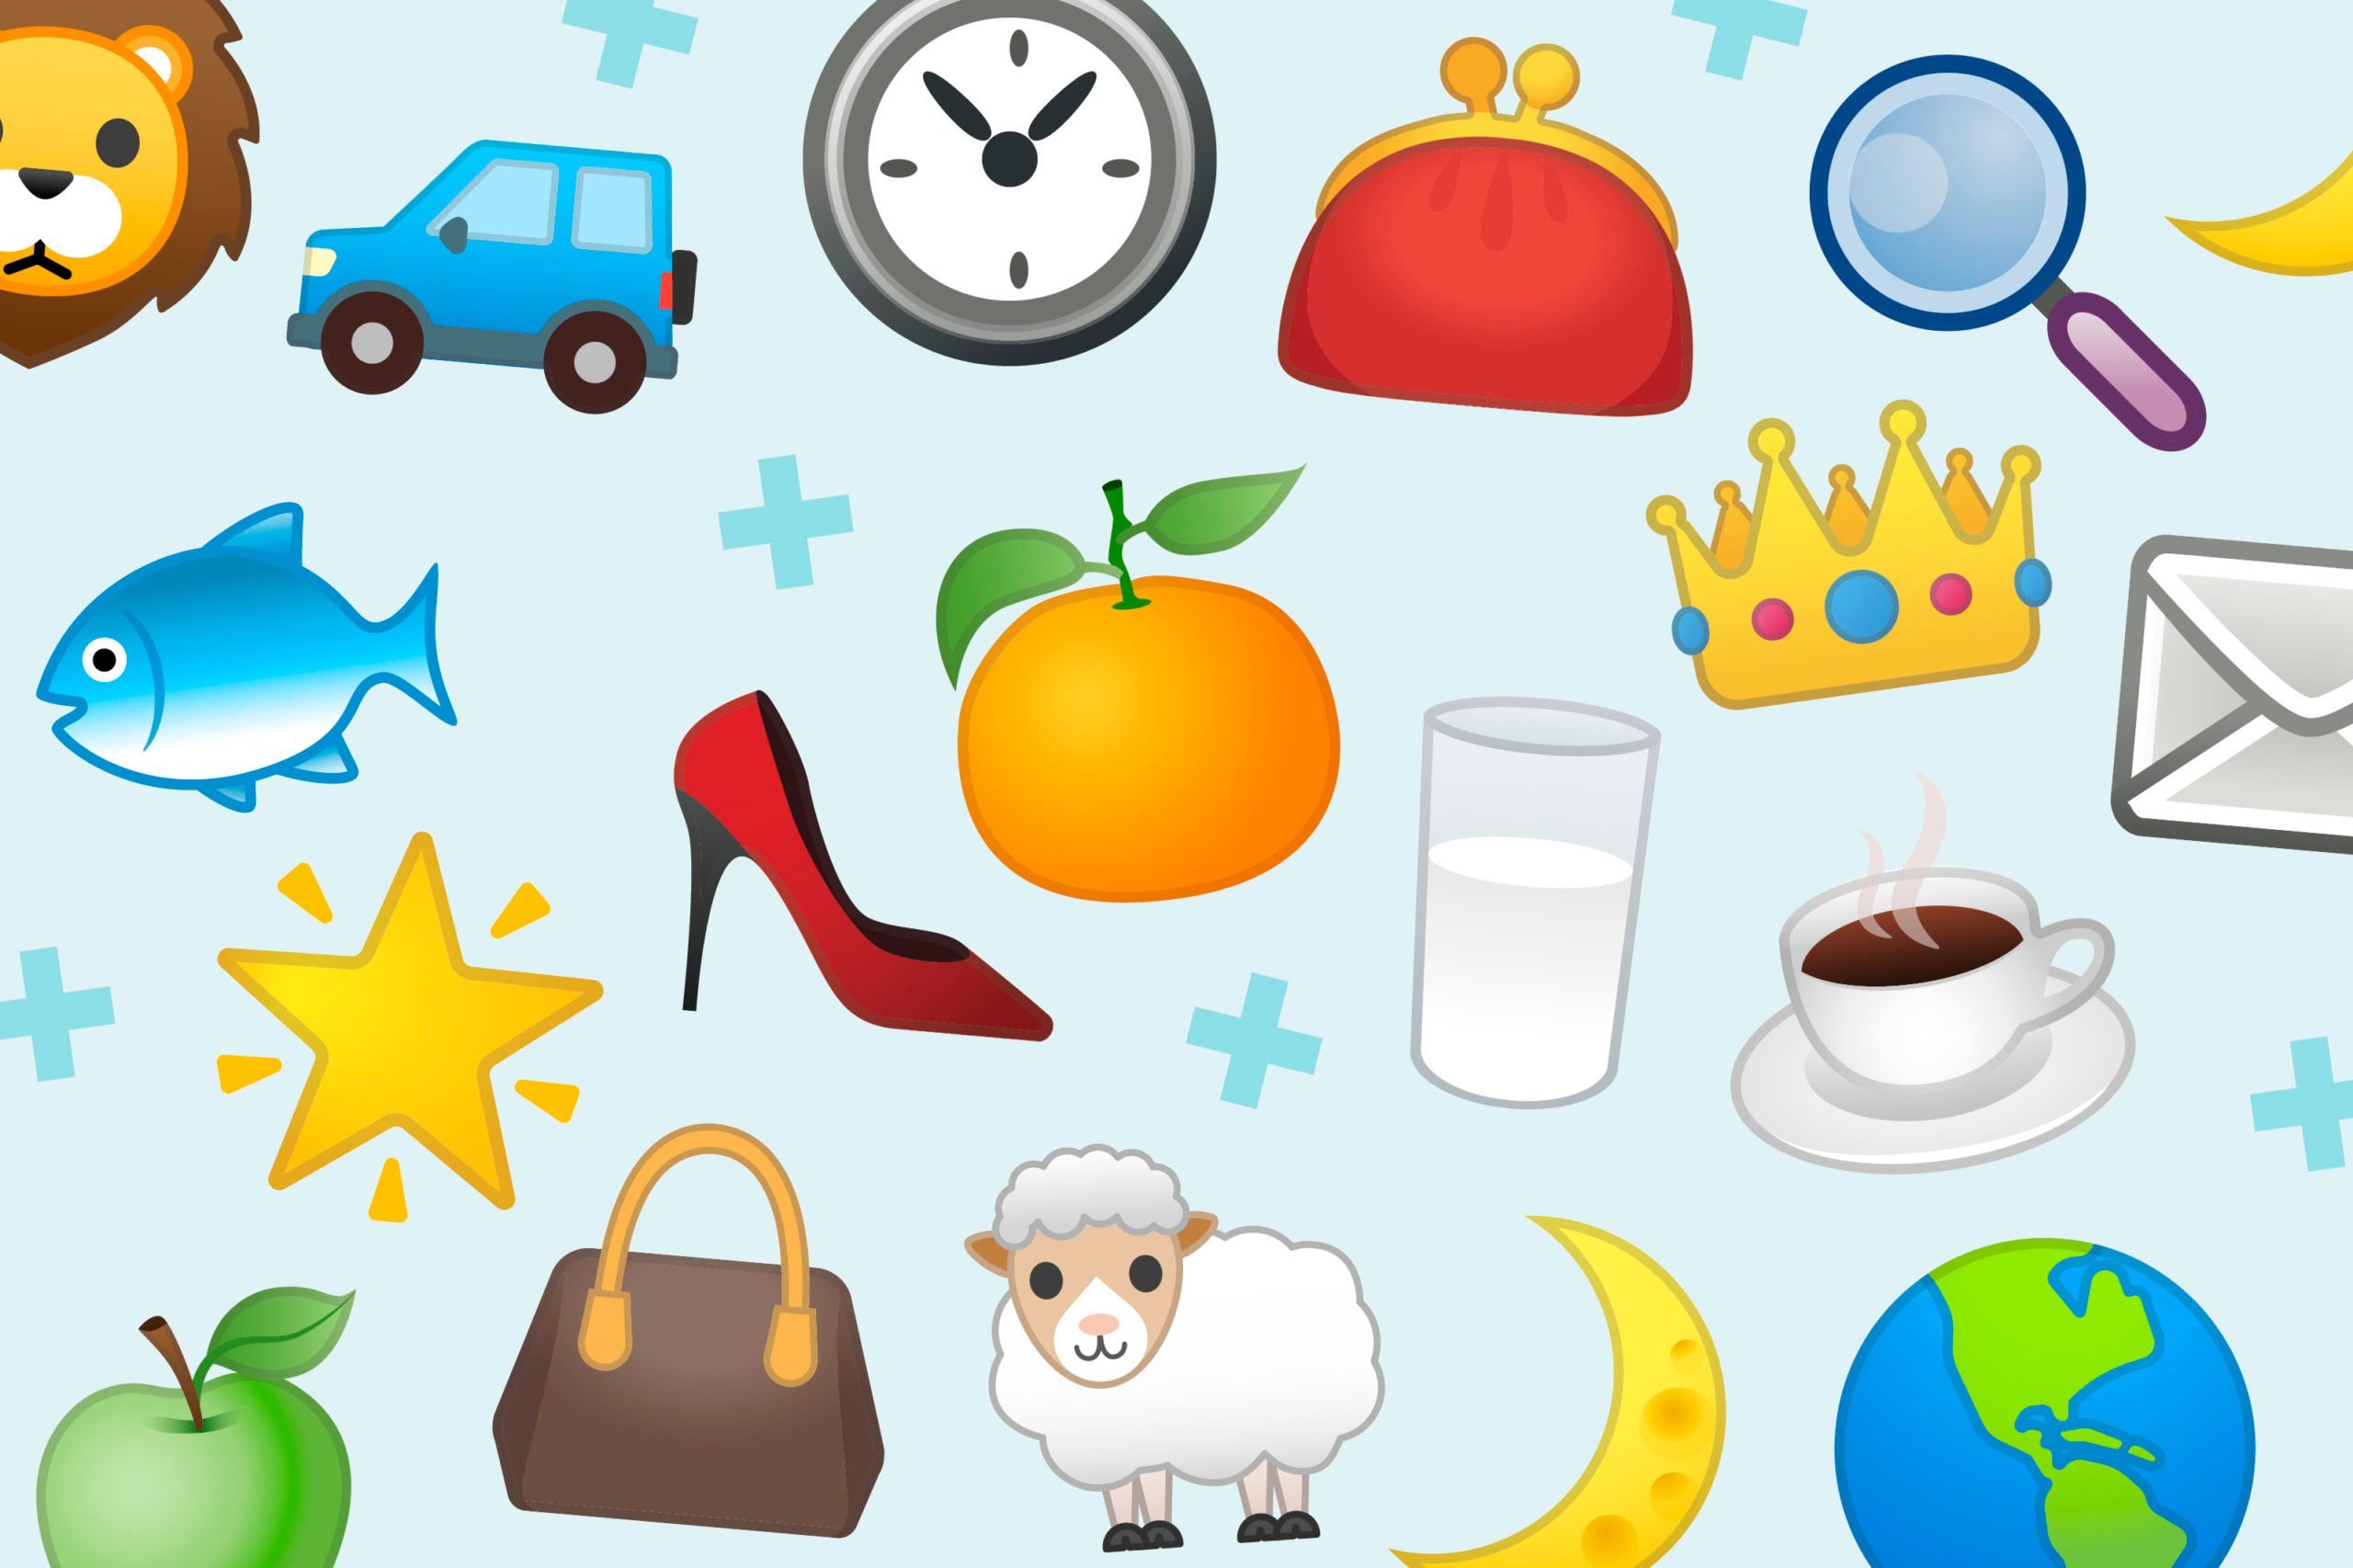 30 Emoji Riddles with Answers | Reader's Digest